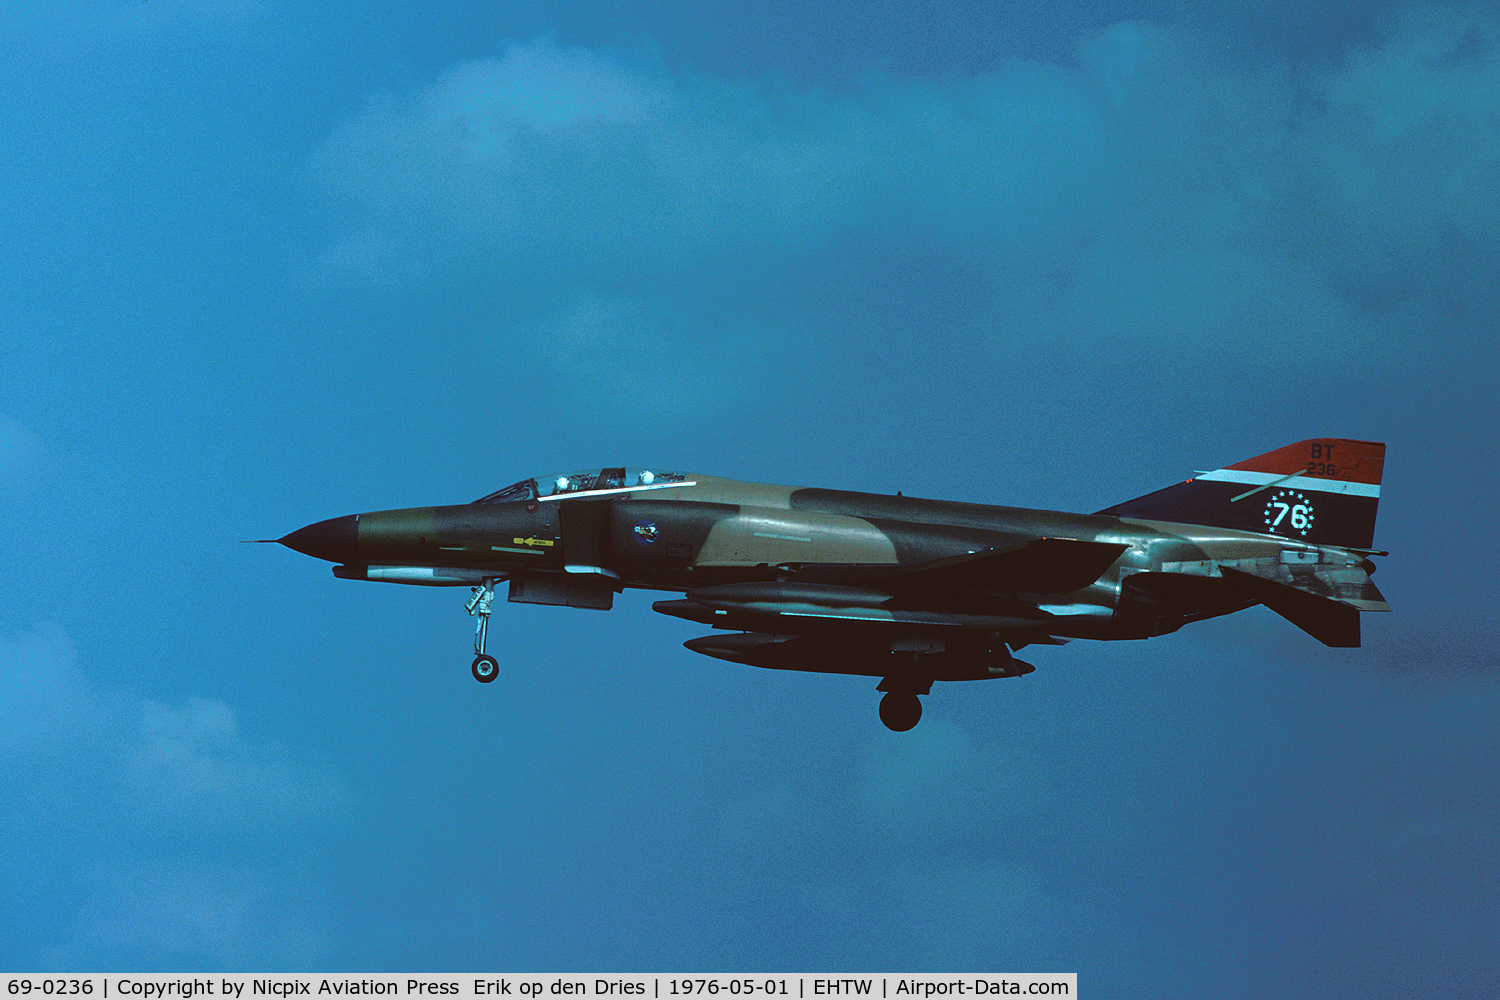 69-0236, McDonnell Douglas F-4E Phantom II C/N 3757, 69-0236 in bicentennial scheme seen here on finals for runway 24 during the TAM 1976 at Twenthe AB, The Netherlands.